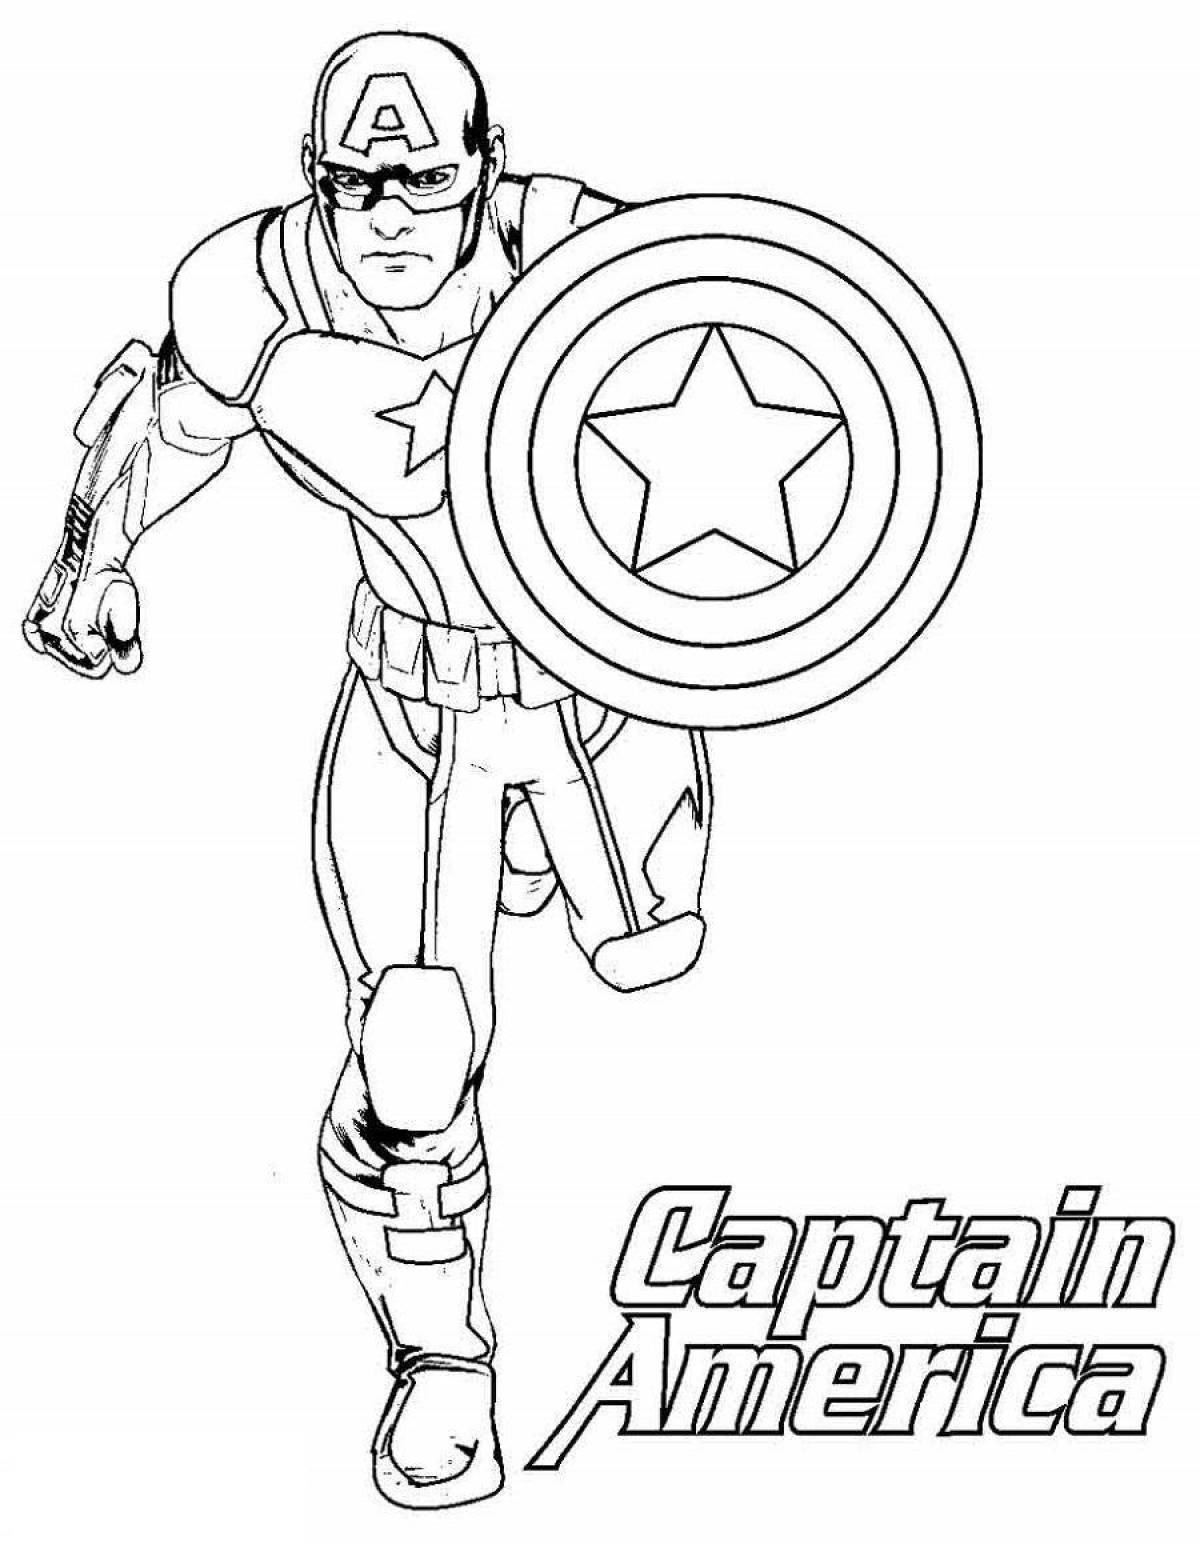 Charming captain america coloring book for boys